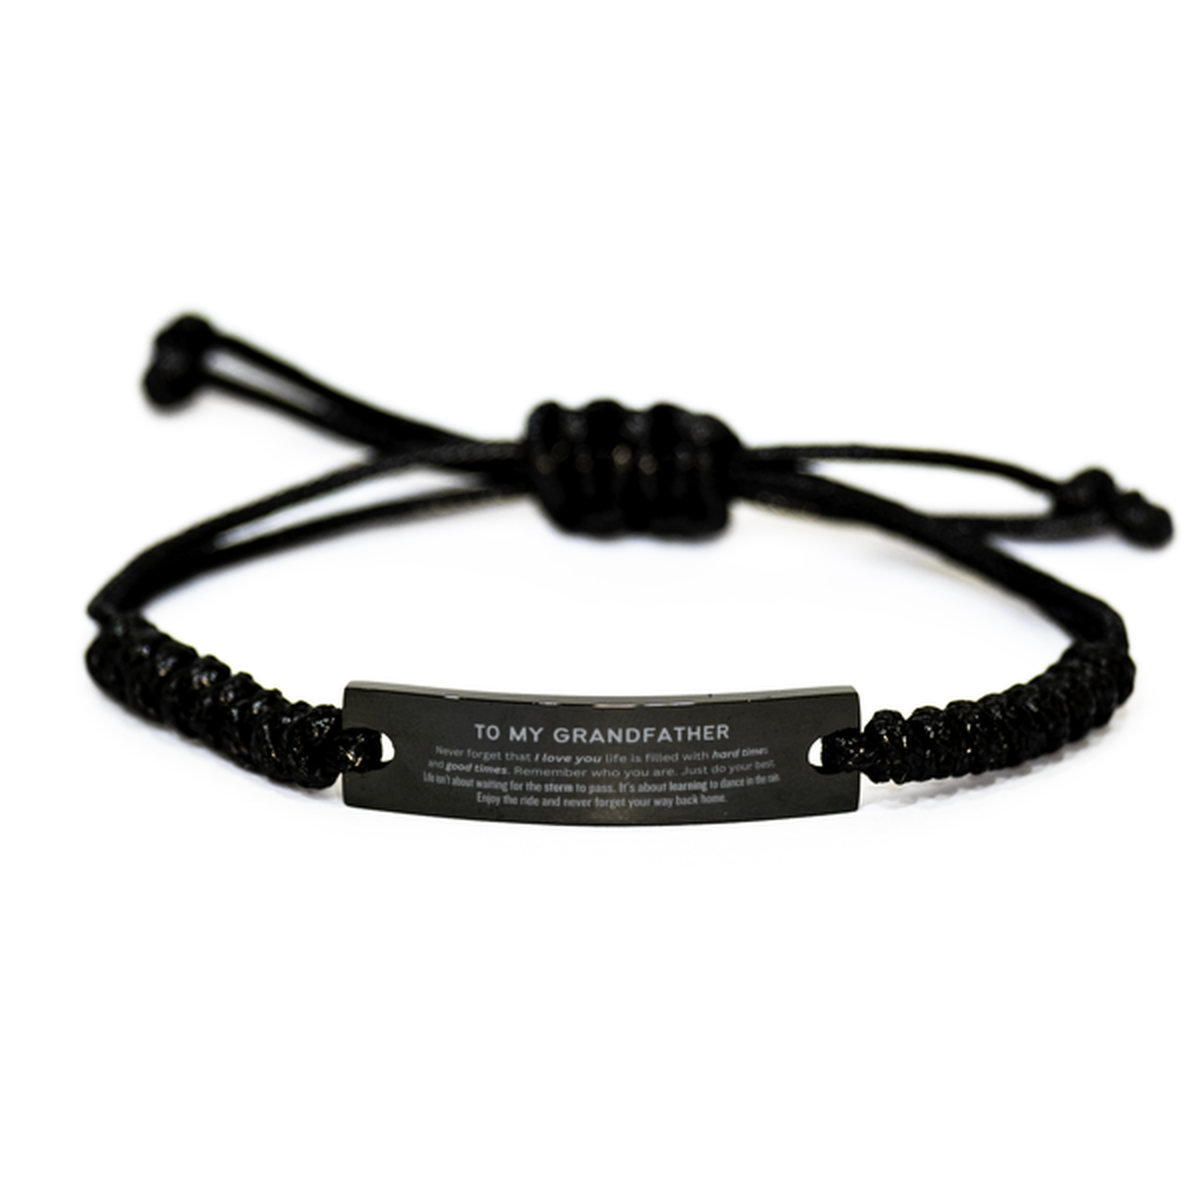 Christmas Grandfather Black Rope Bracelet Gifts, To My Grandfather Birthday Thank You Gifts For Grandfather, Graduation Unique Gifts For Grandfather To My Grandfather Never forget that I love you life is filled with hard times and good times. Remember who